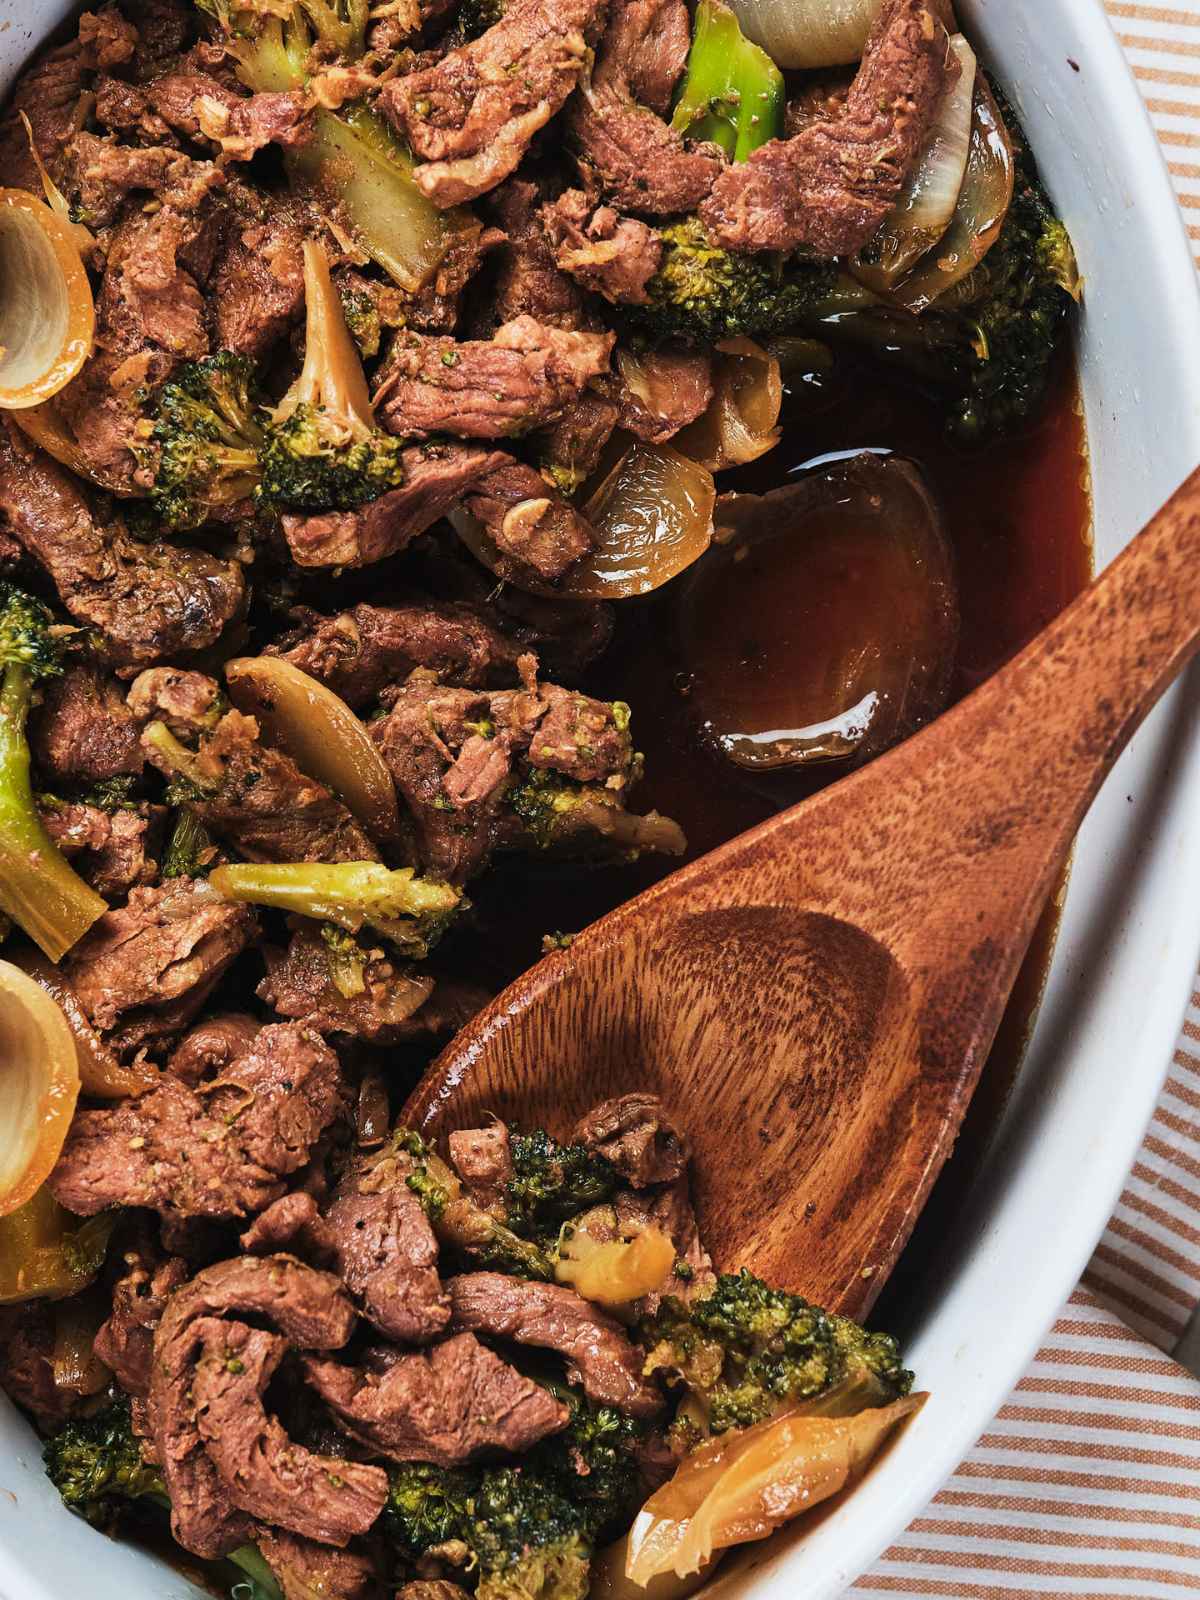 A close-up image of a keto beef and broccoli stir-fry in a white dish with a wooden spoon.